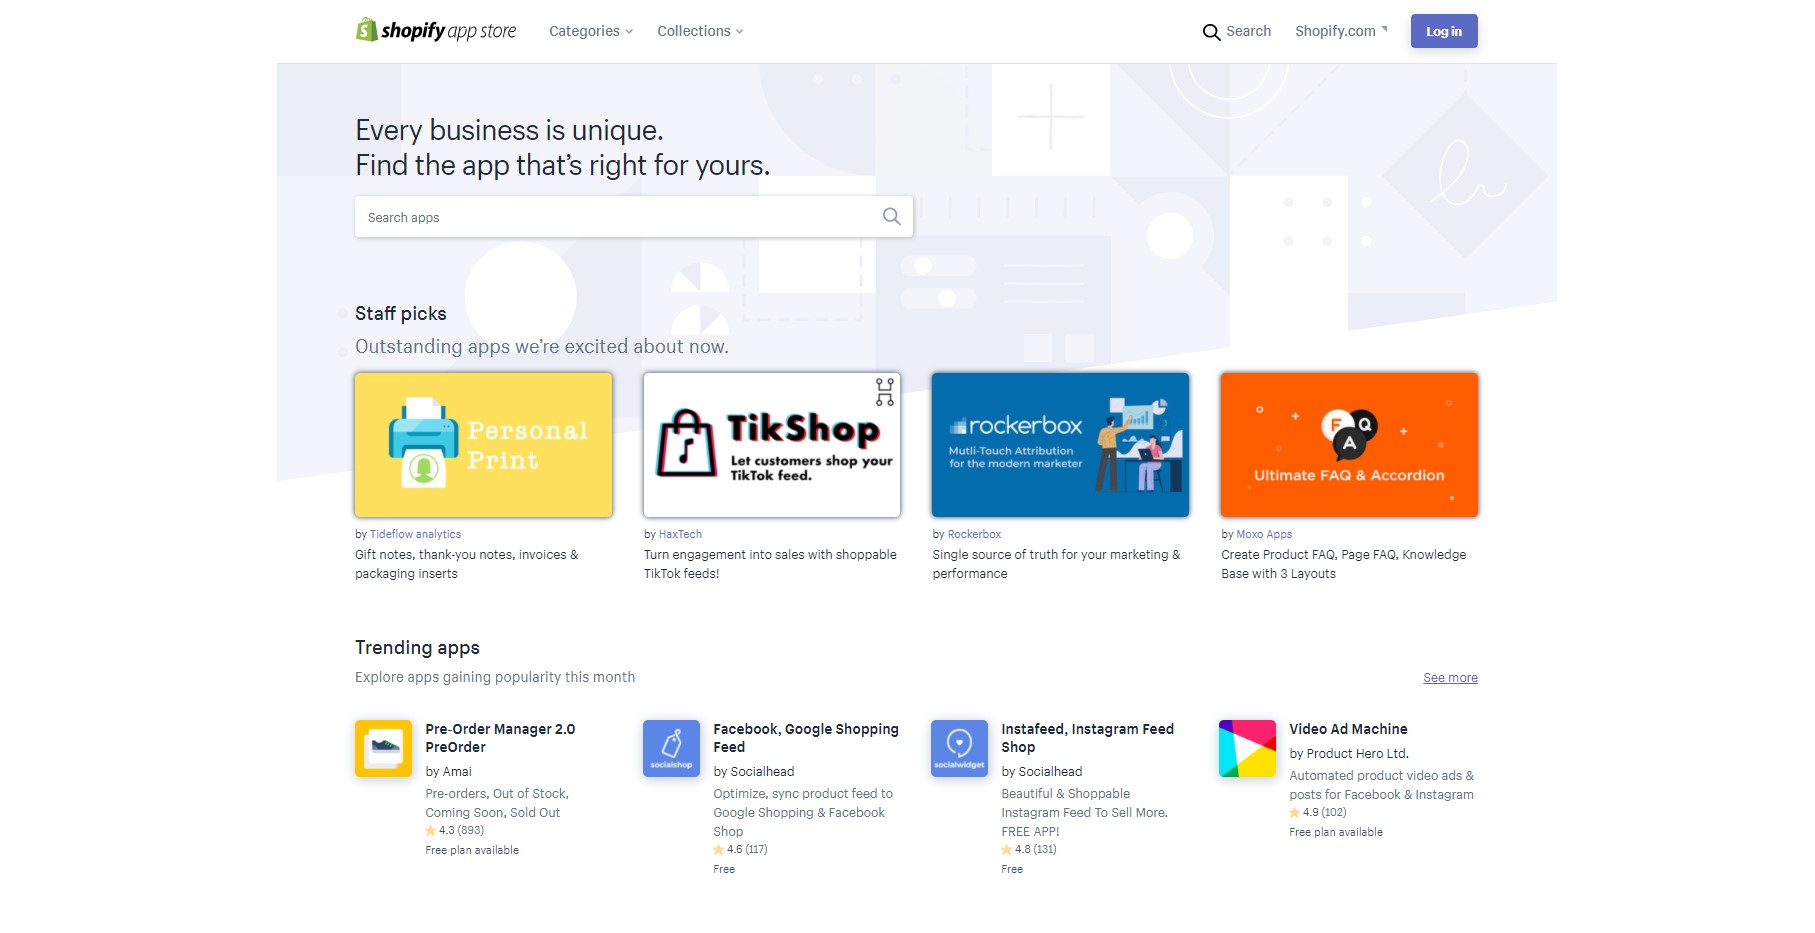 Shopify app store provides thousands of apps to support online merchants